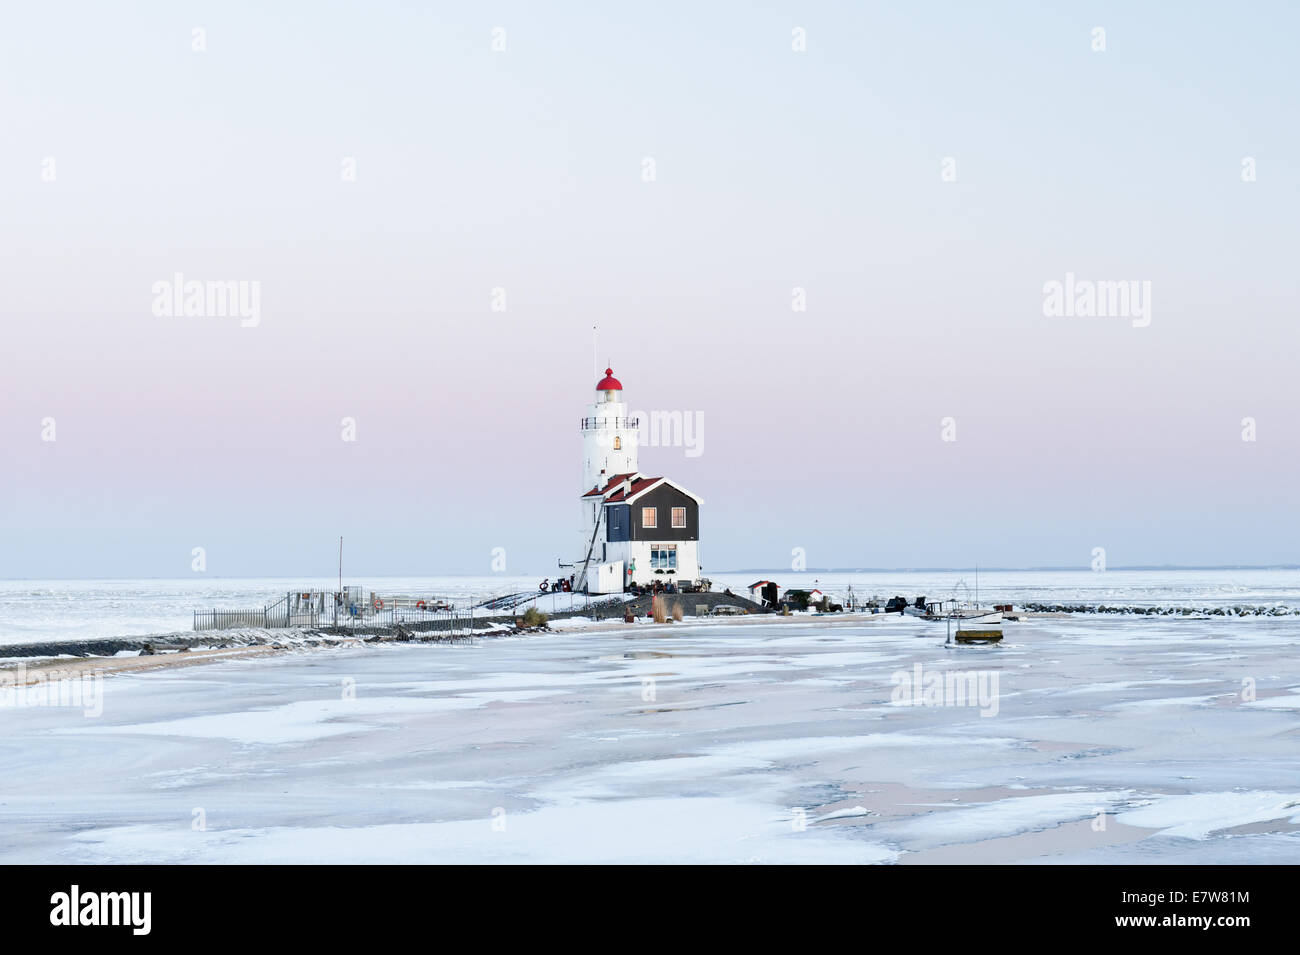 A frozen lake, reeds, and lighthouse in Holland Stock Photo